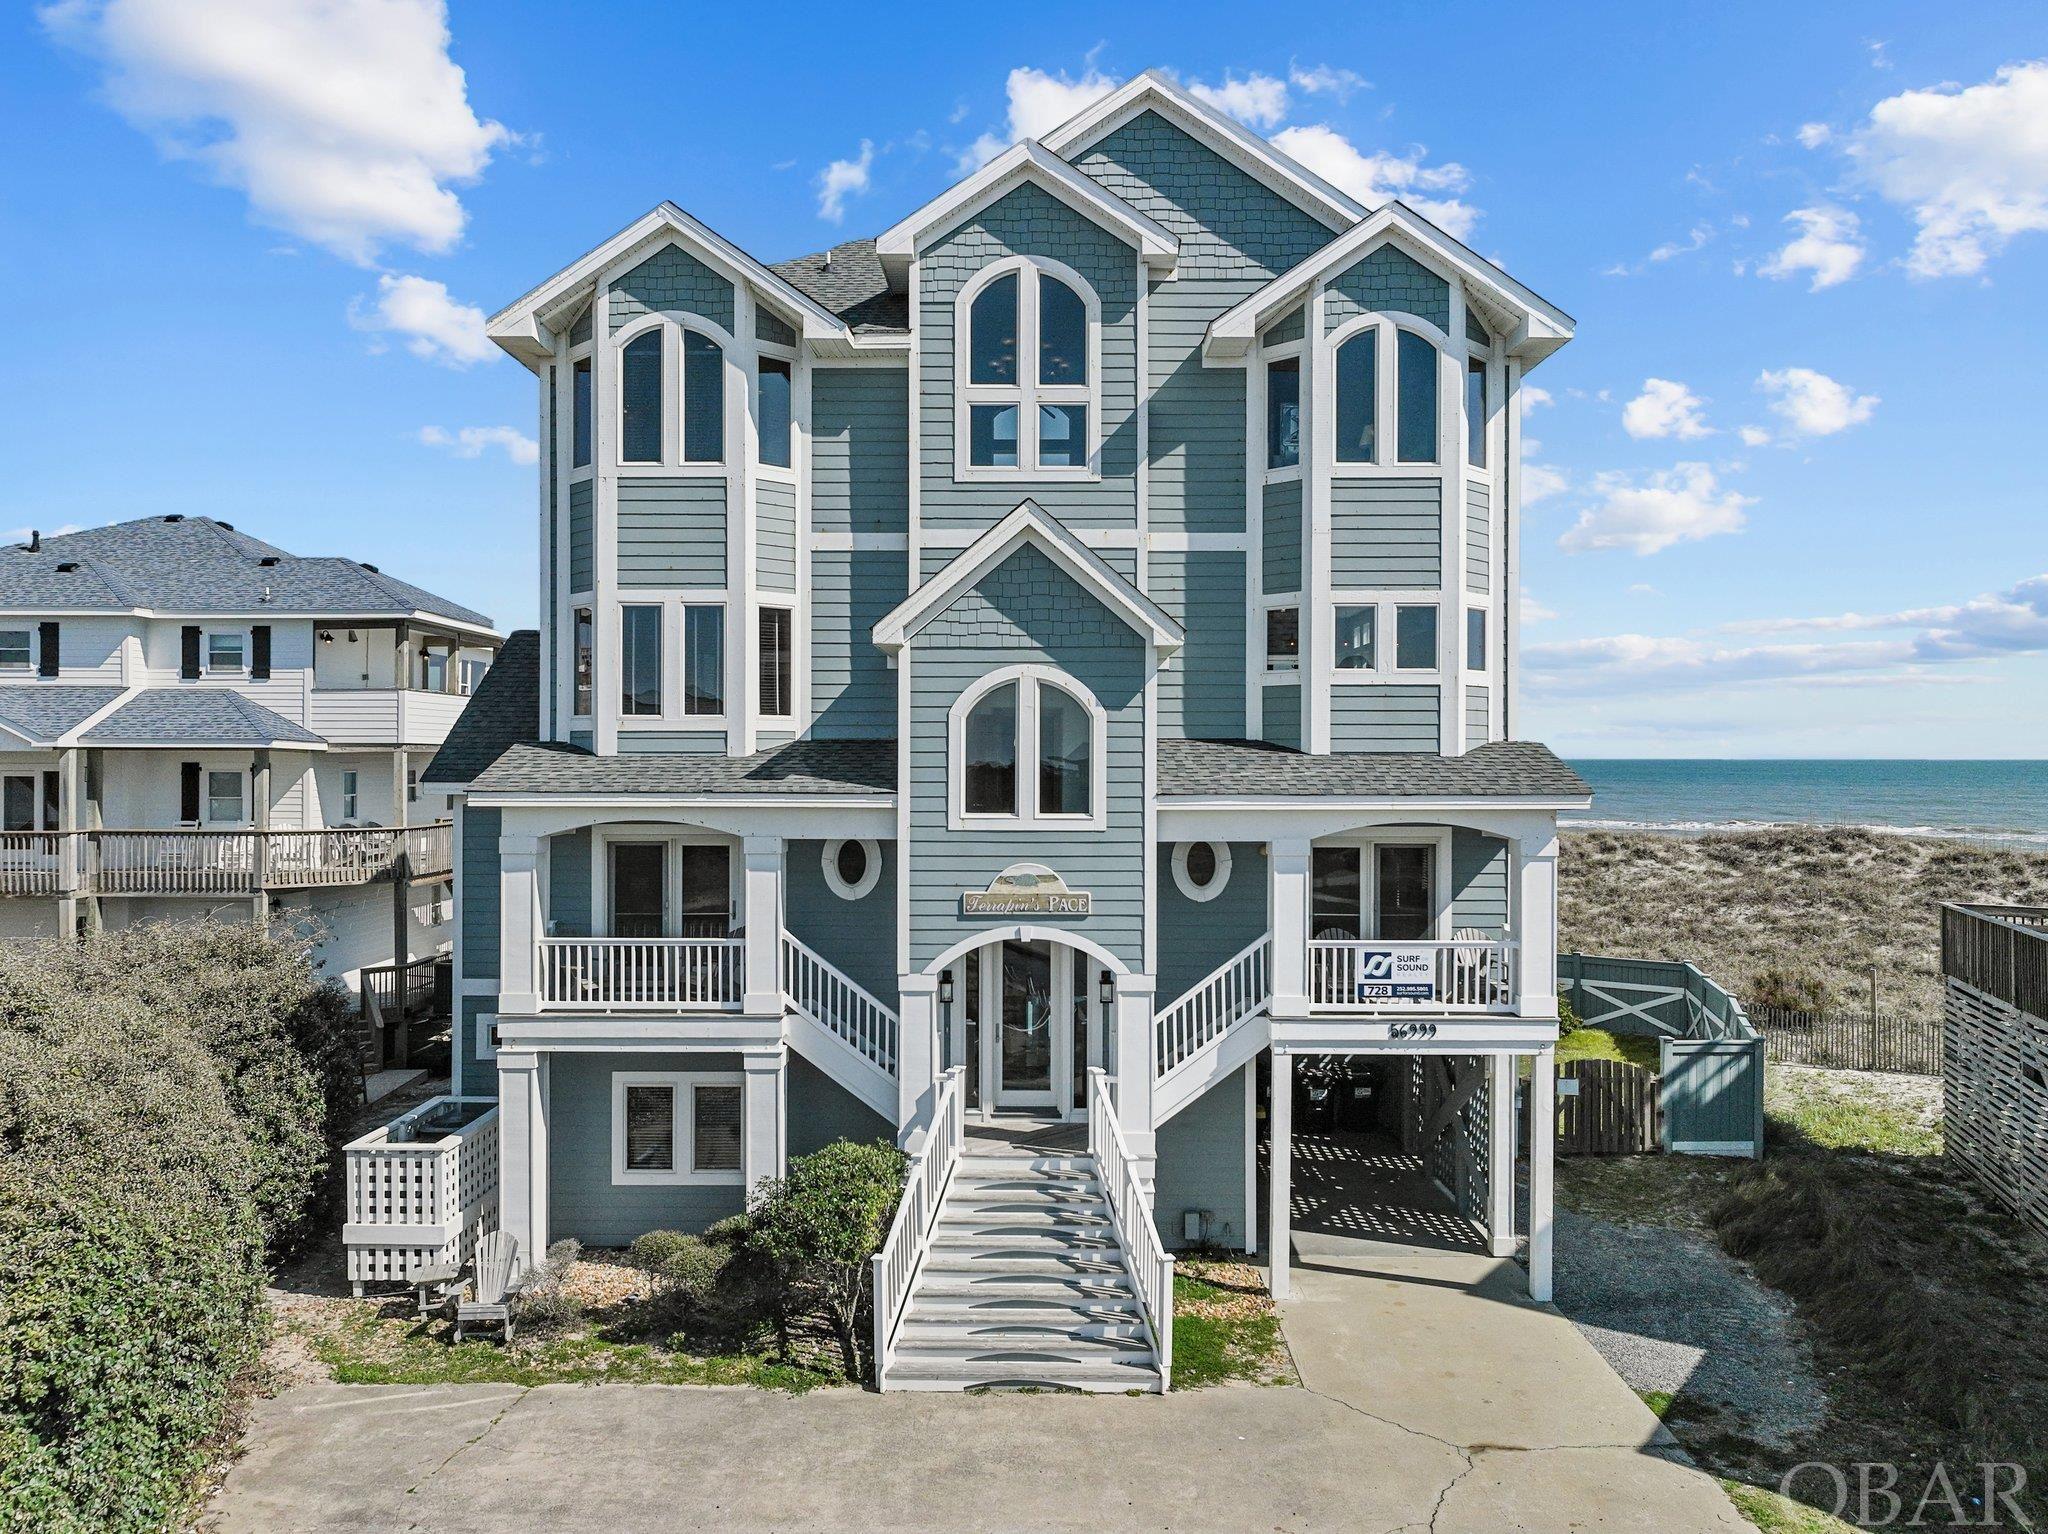 "Terrapin's Pace"; this opulent Oceanfront Home offers a unique 4 story custom design, provides everything guests and vacationers could desire, with stylish finish materials, and some of the most expansive and panoramic ocean views around….all just steps from the beach!  Providing all it does, in this location, this vacation home has always been a fan favorite, generating consistent high rental income, and has another great rental season booked for 2024.  Over $244k owner rental income during 2023, and already over $216k owner income for 2024, with room to grow. At  5,091 sf, (with elevator to all levels) this dramatic property offers tons of space and common areas to spread out and enjoy;  including 8 bedrooms, all primary suites for comfort and privacy & with mounted HDTV’s,  8 full and 2 half baths; multiple common areas include a fun recreation room with pool table, foosball, and kitchenette, a beautiful Oak paneled library / theater room, an expansive great / living / dining area overlooking the ocean, plus an additional den / media room on the 4th level, offering a wet bar & amazing dune, beach, and ocean views!  Outside enjoyment areas include ample decking all along the oceanfront to soak in the views, covered Soundside decking, and a backyard pool area that feels like your own Oceanfront private outdoor resort, with an expansive heated concrete pool,  custom in-ground hot tub, and great Tiki bar for outdoor entertaining.  Comfortable living in the great room with cathedral ceilings, reclaimed heart pine floors, large dining area, all with wide ocean views, and a large gourmet kitchen with custom cabinets, granite counters, and upgraded stainless steel appliances, including double wall ovens, double d/w's, gas range.  Each bedroom has it’s own style, each bath features custom designed tiles, and the luxurious top level King Suite features private oceanfront deck and large upscale custom bath.  At Terrapin’s Pace, you'll experience dramatic and commanding views from all over the home, enjoy all the desired amenities inside and out, just steps from the beautiful beaches of Hatteras Island. Offered fully furnished, equipped, and accessorized with attractive coastal decor. In a great location, close to the fun and conveniences of Hatteras Village, home to the fishing fleet, headboats, restaurants, shops, and easy access to the 4x4 beaches and Ocracroke Ferry.  Homeowners have made many significant updates to the home recently, in quality minded fashion, Update List available.  Make a point to view additional pictures and 3D Virtual Floorplan Tour at: https://listings.lighthousevisuals.com/sites/yqkrvqk/unbranded